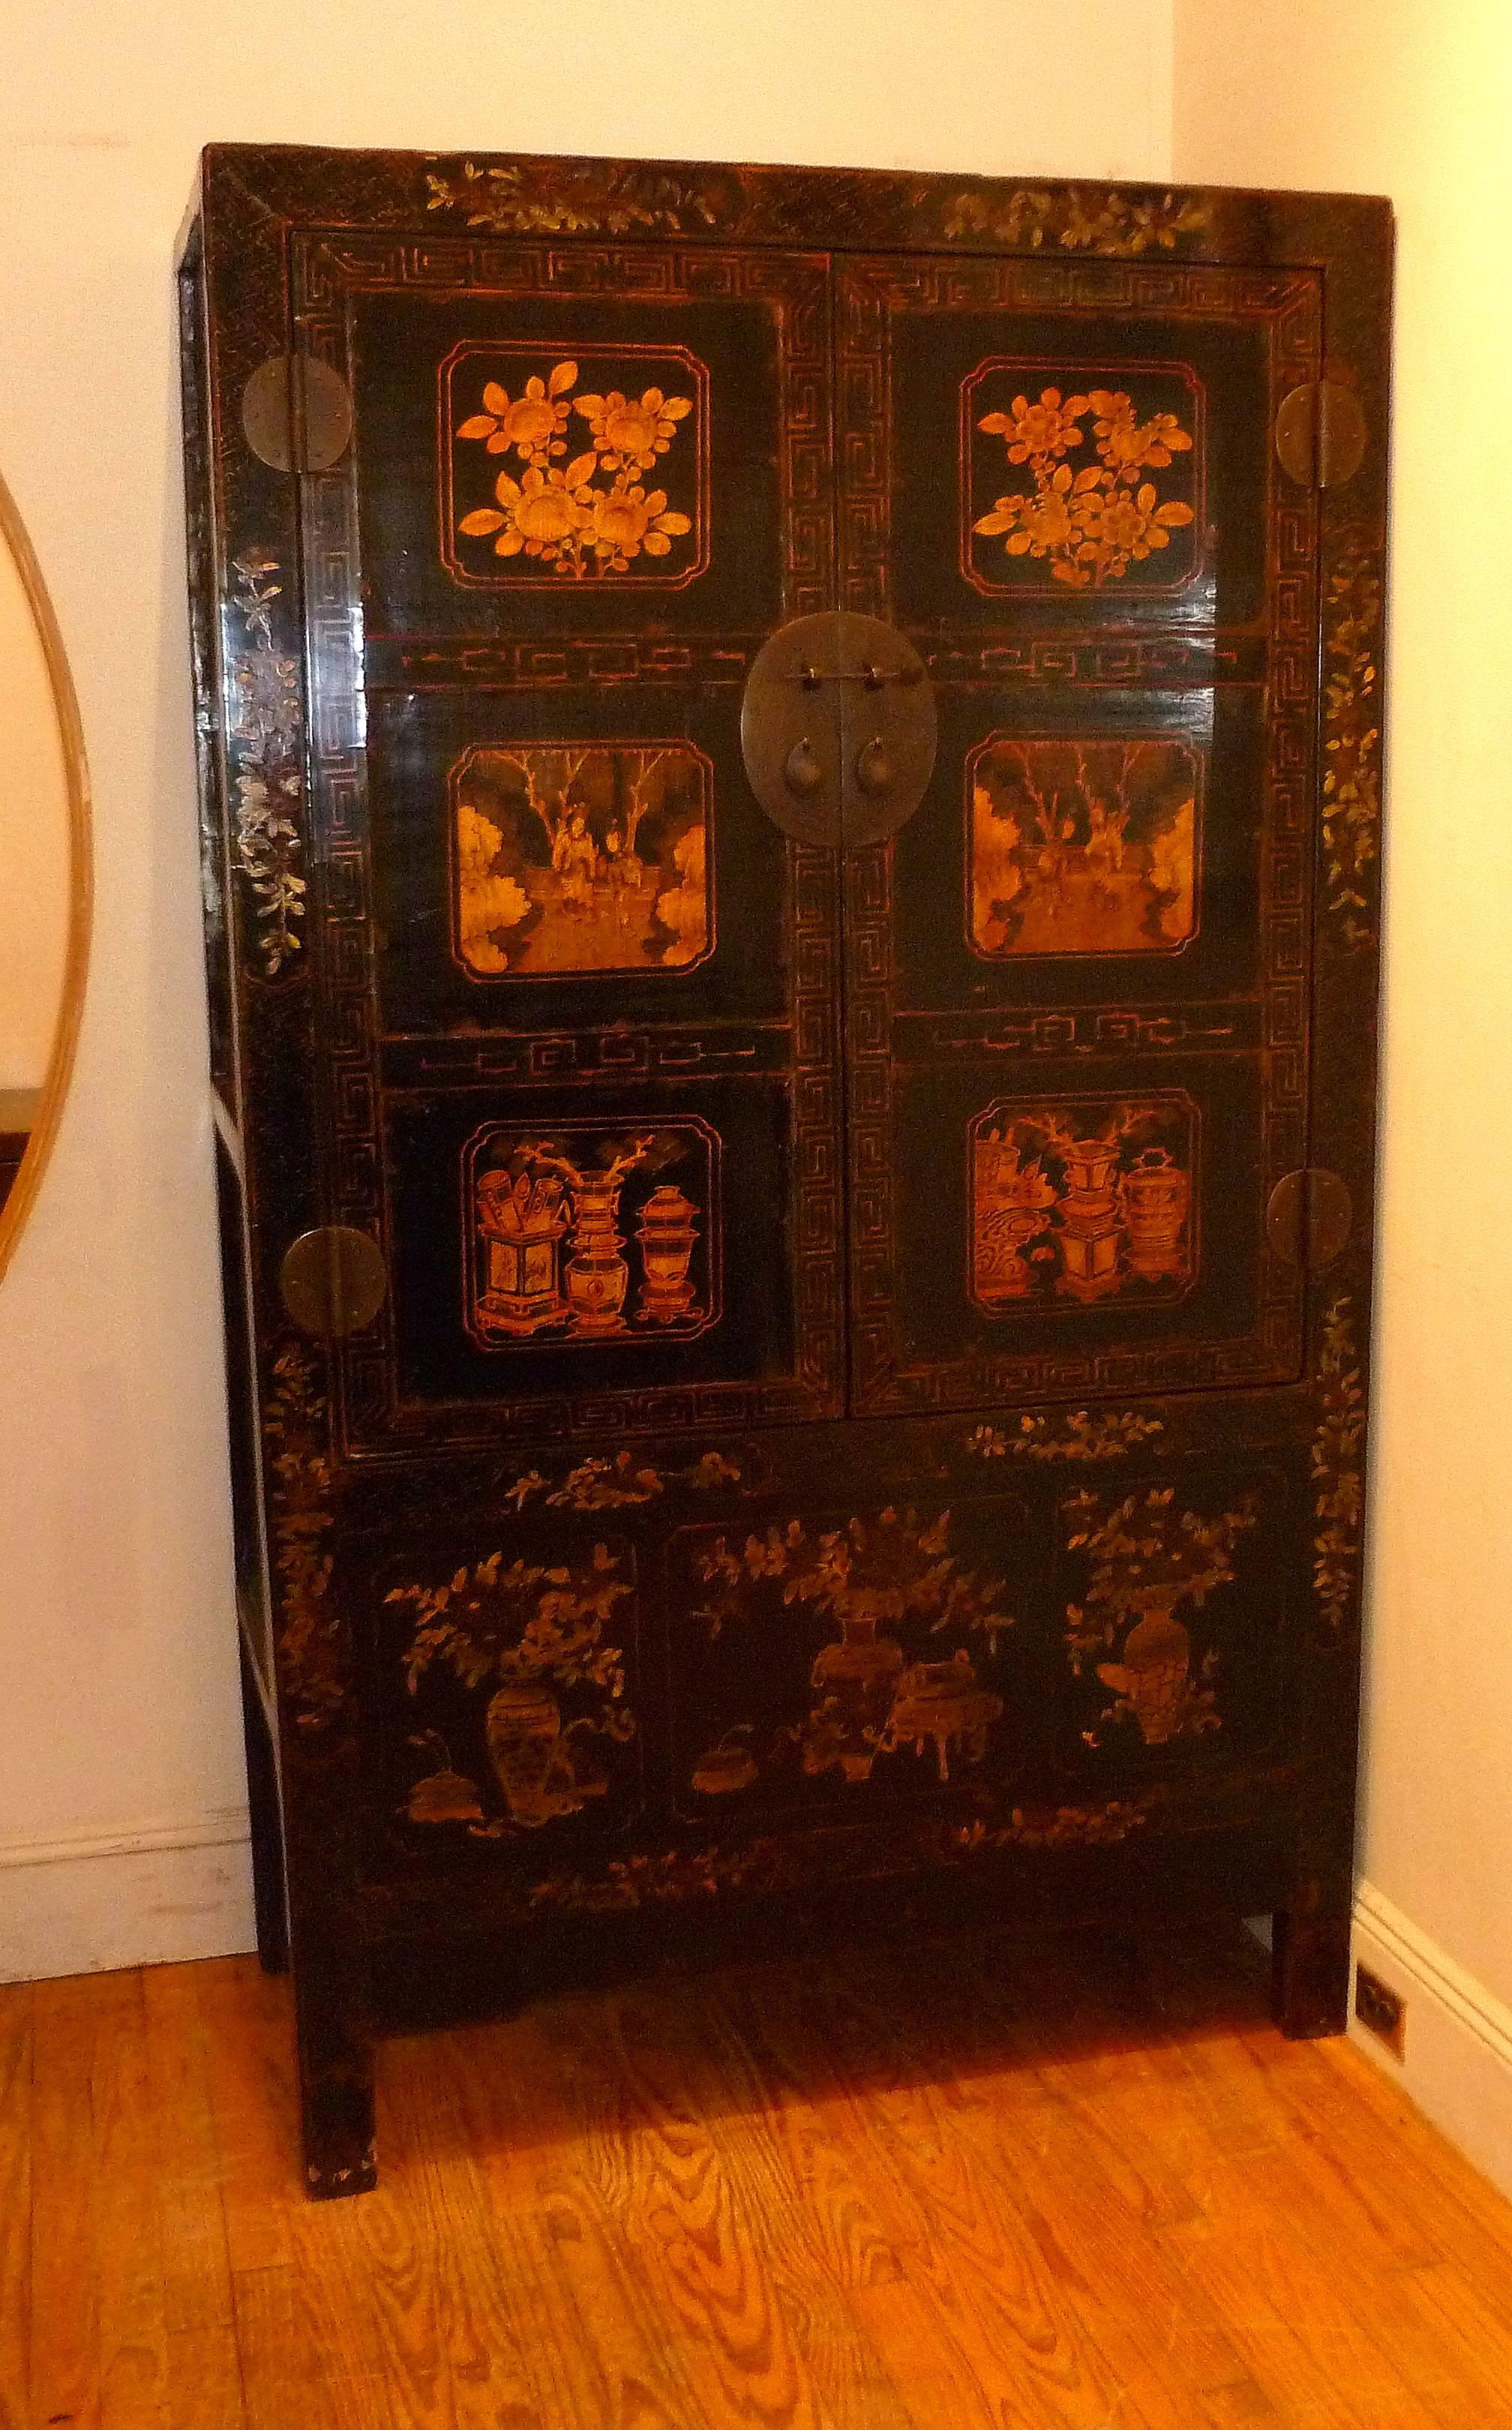 Black lacquer armoire with gilt floral and Peking opera motif. Pair of open door with shelf inside and hidden compartment.